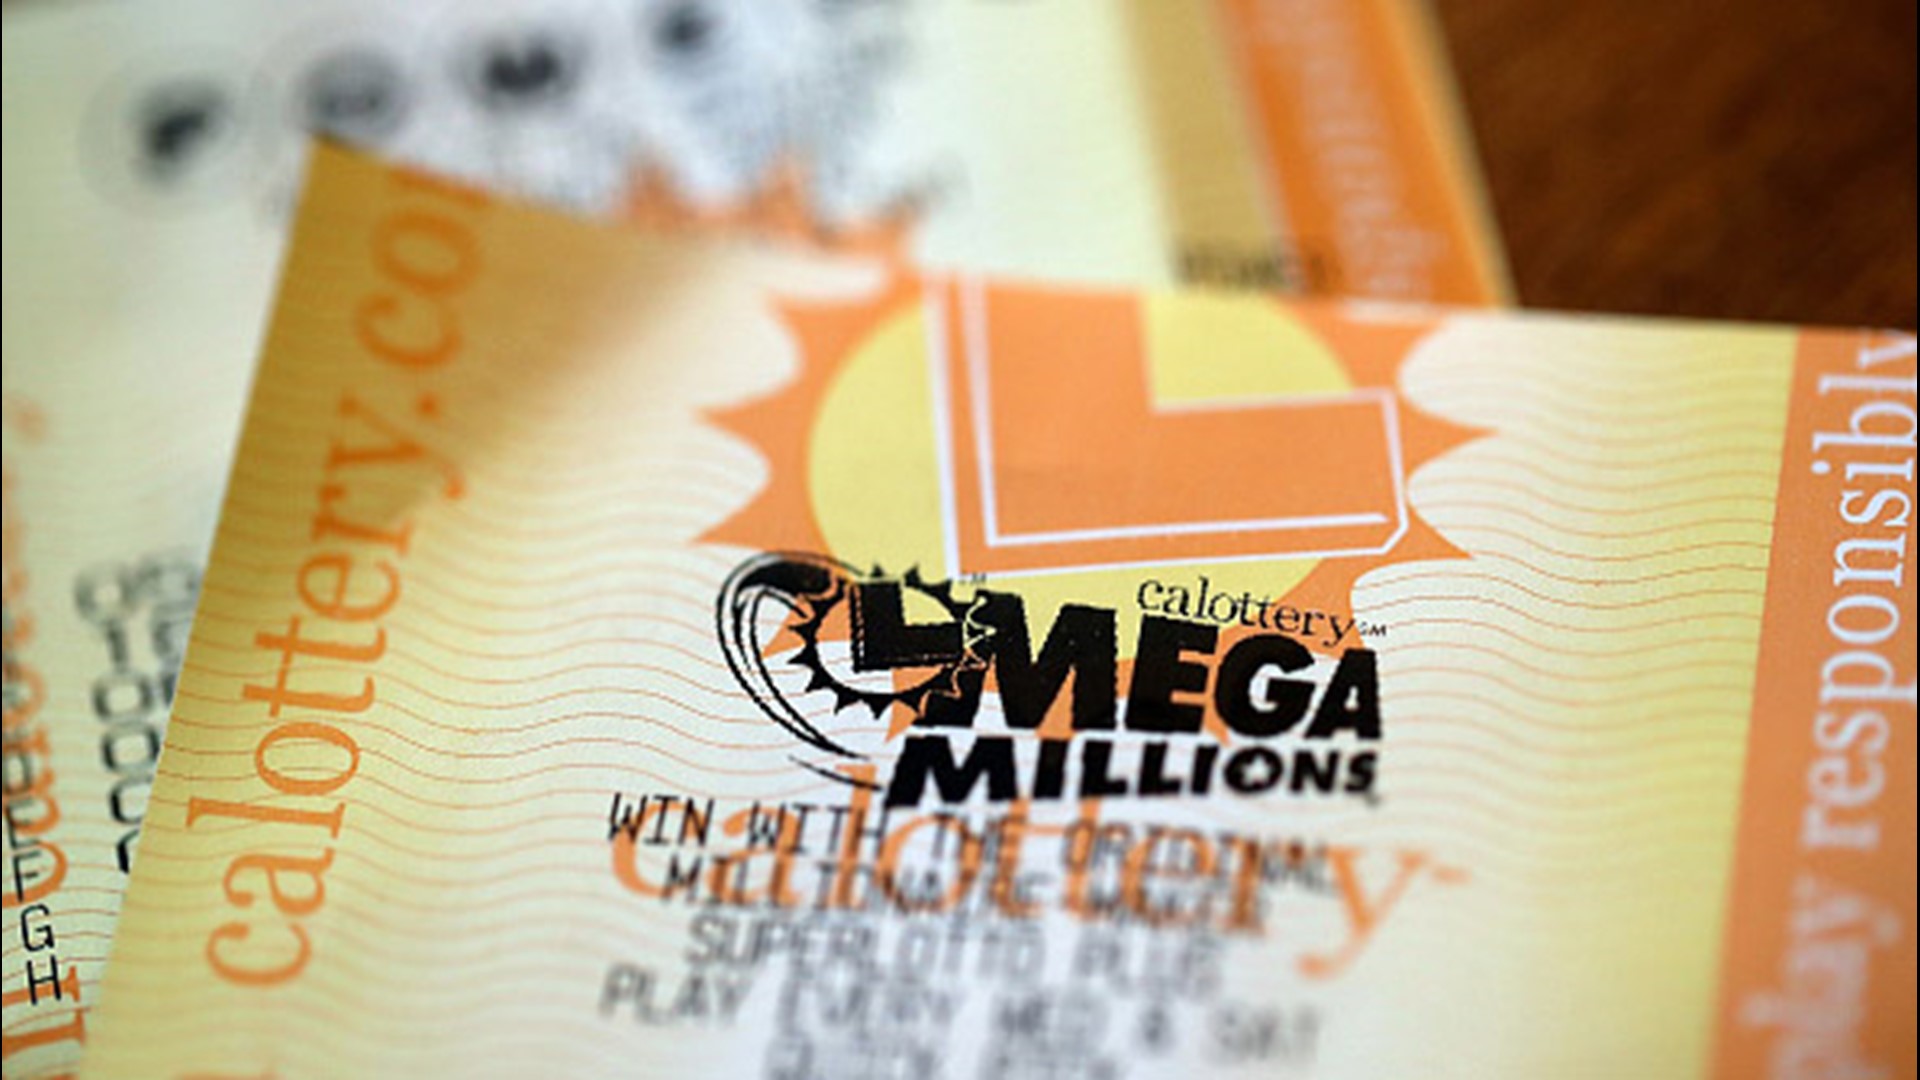 The winning ticket could be life-changing.